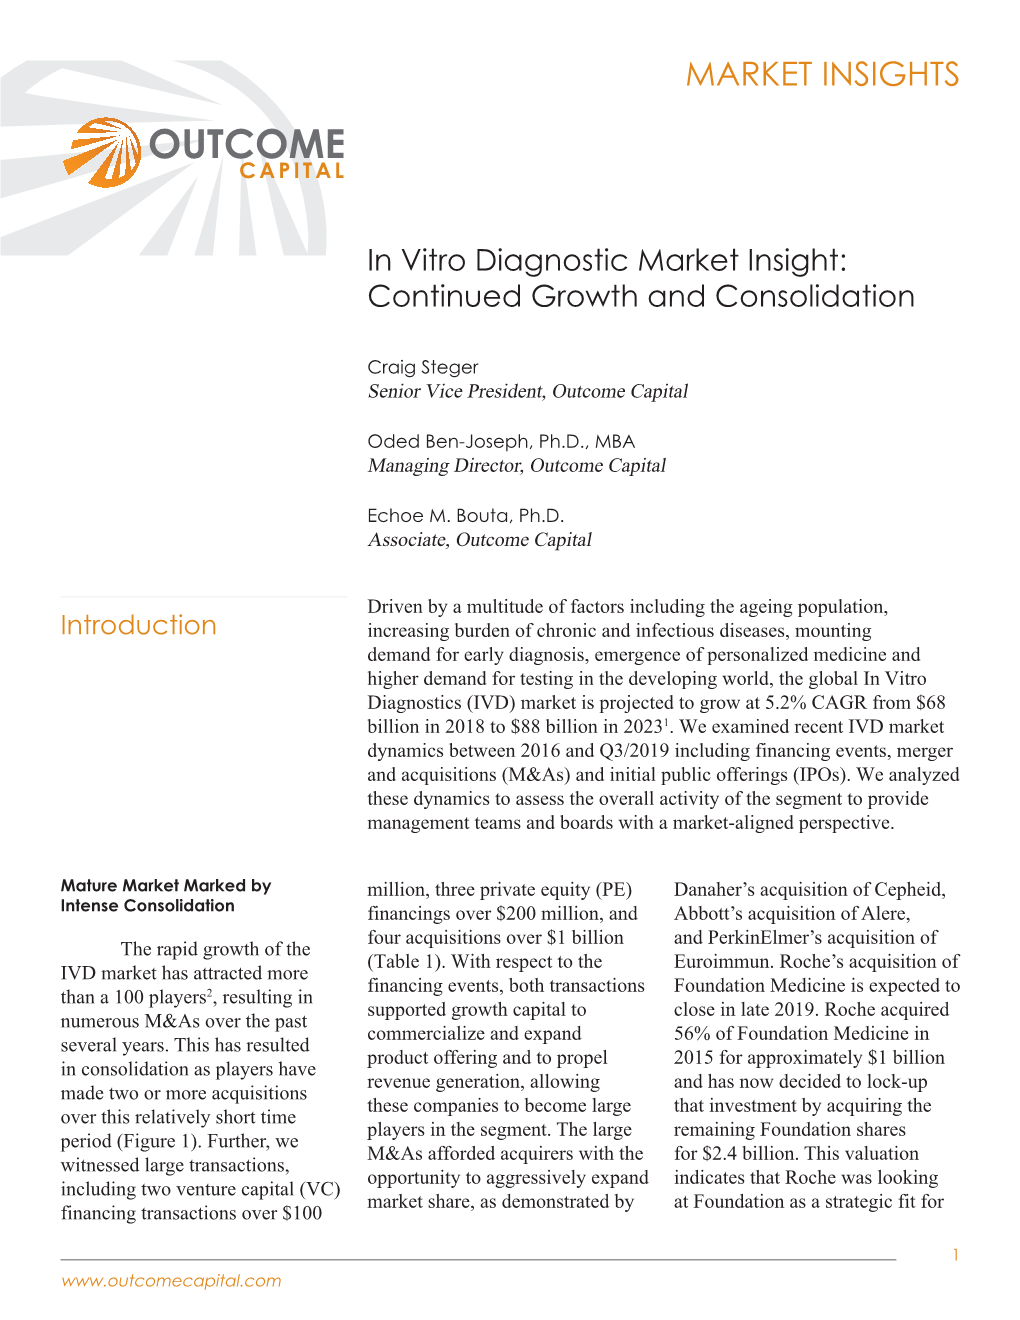 In Vitro Diagnostic Market Insight: Continued Growth and Consolidation